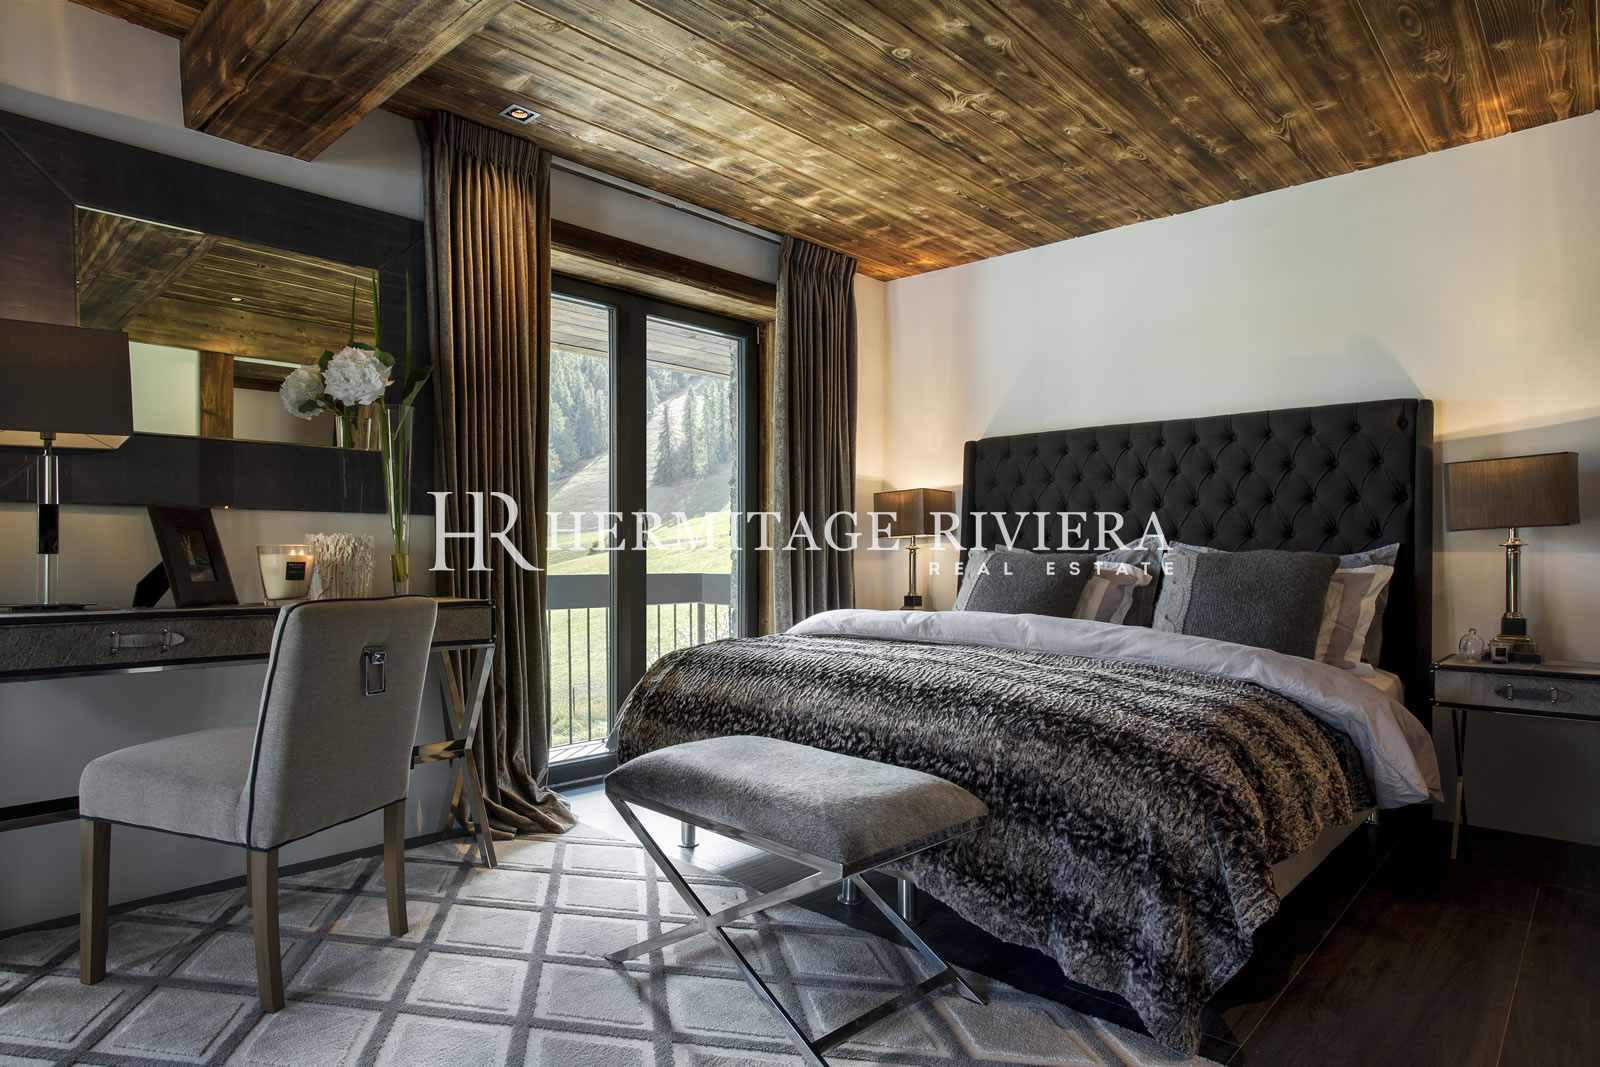 Luxury boutique hotel by the slopes (image 7)